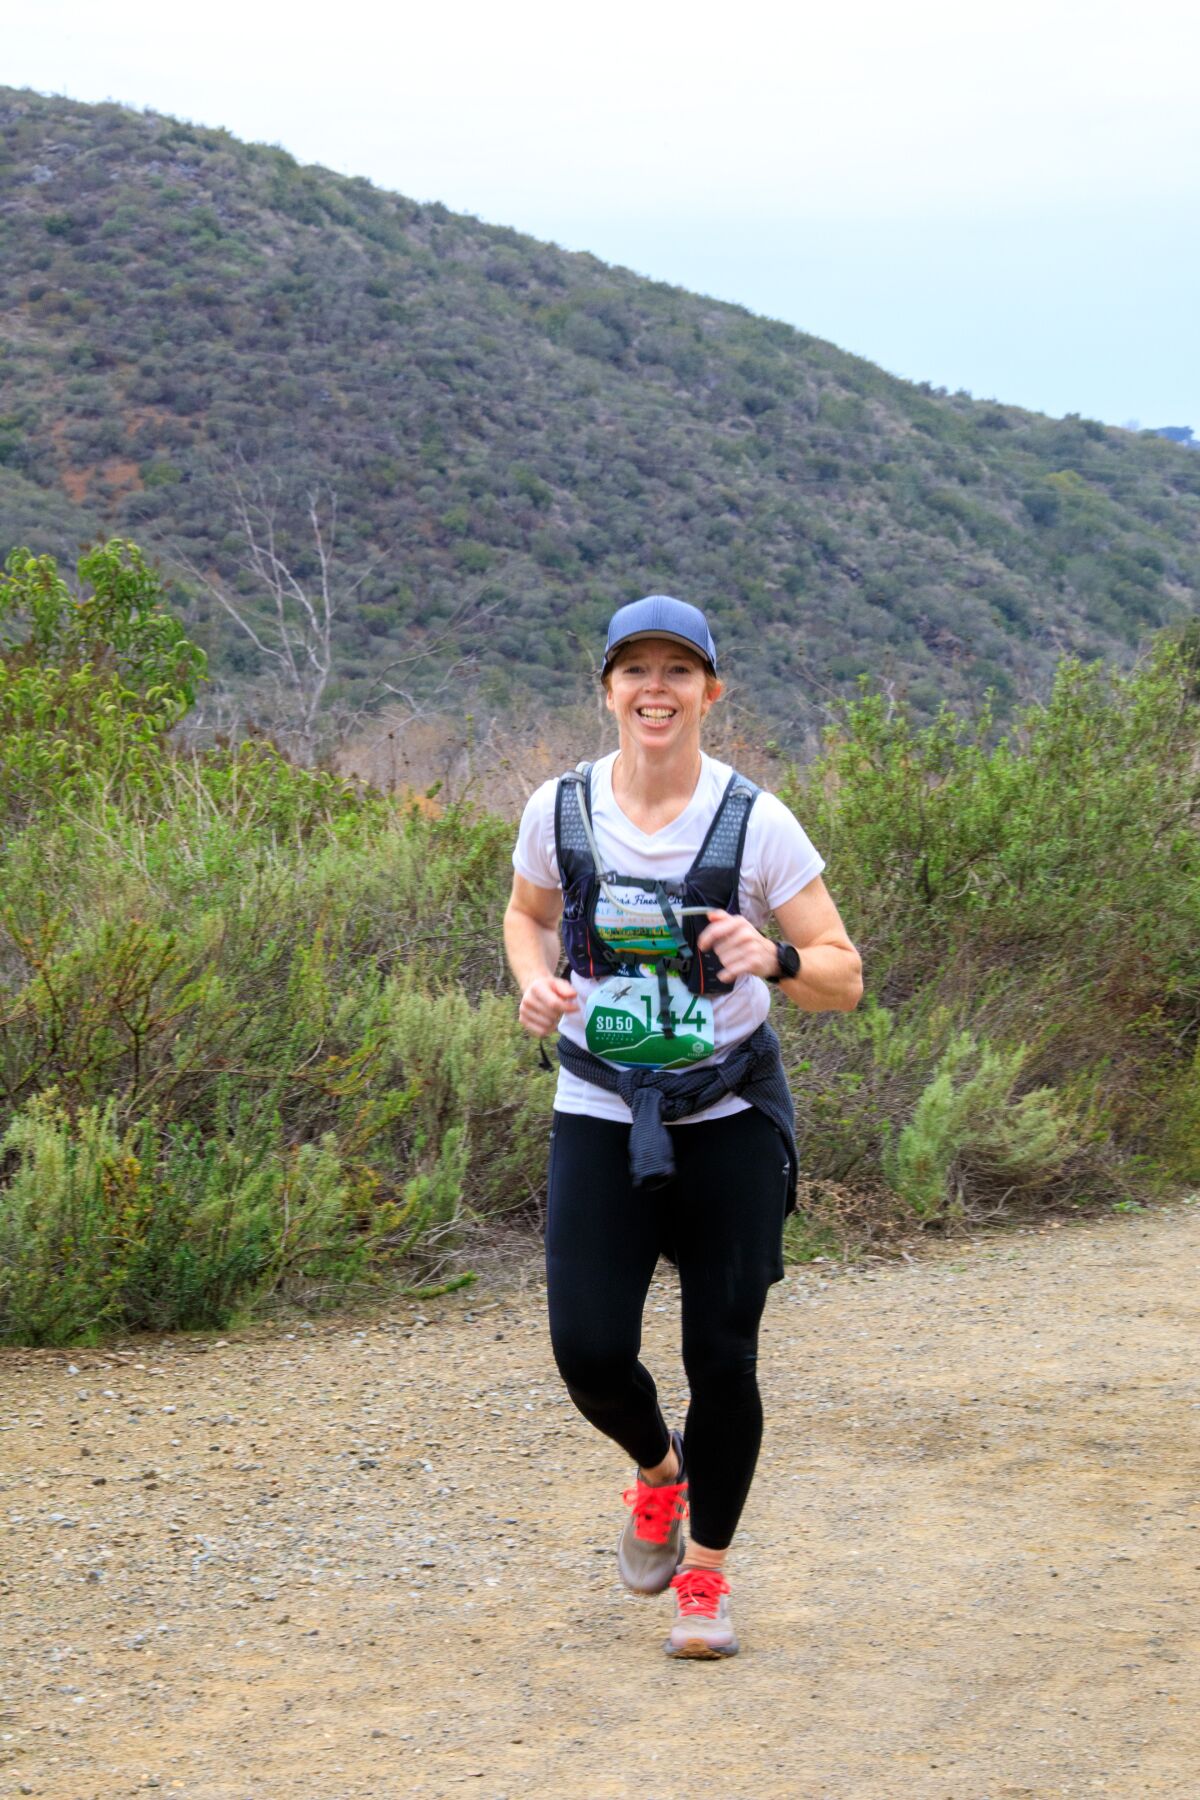 La Jolla resident and UC San Diego pharmacist Laura Lafranchise runs in the San Diego 50-Mile event Jan. 15.